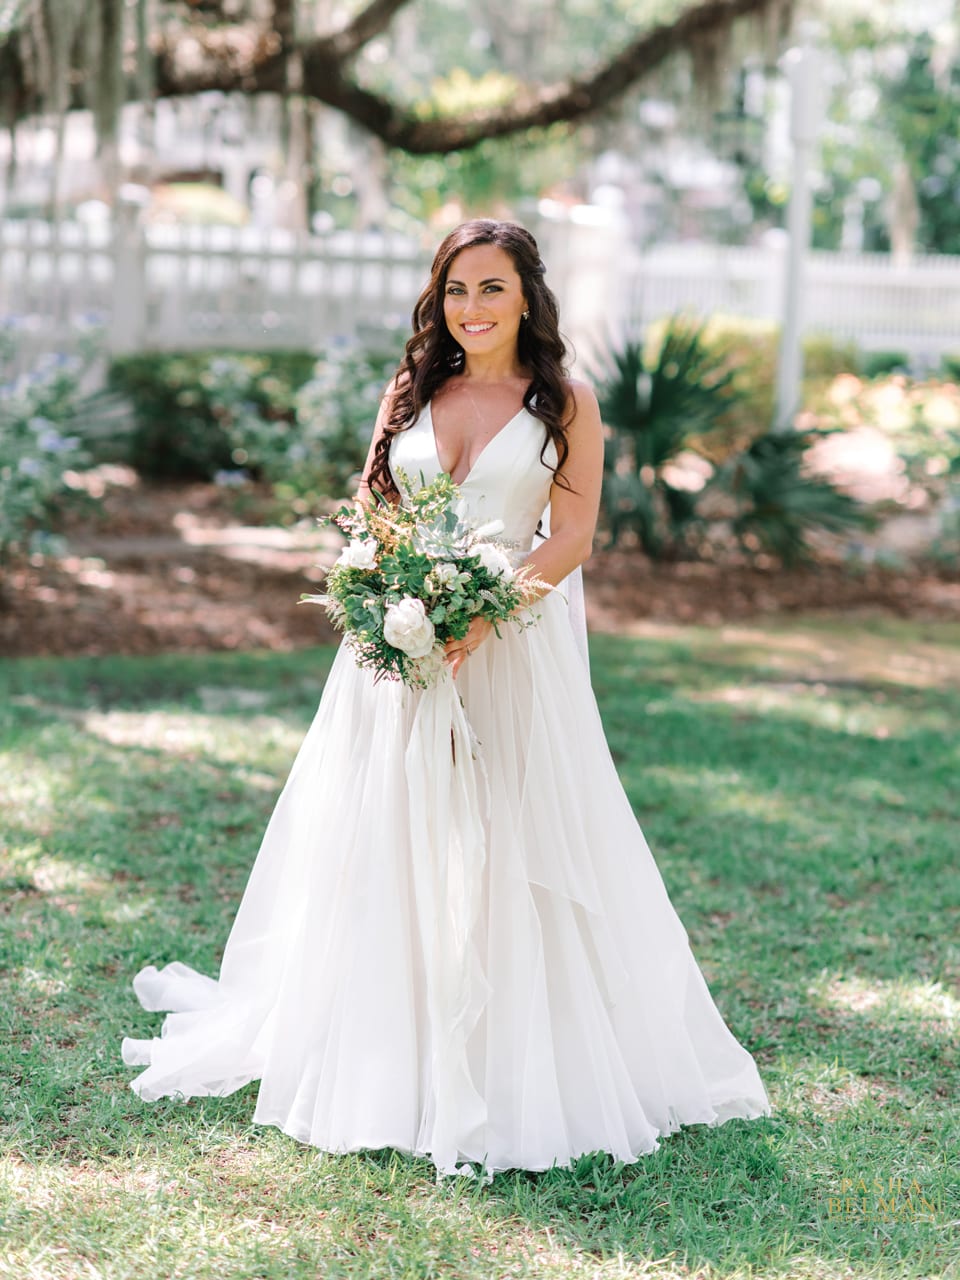 A Romantic Wachesaw Plantation Wedding. Gorgeous bride with hair down. Hair make up and ideas